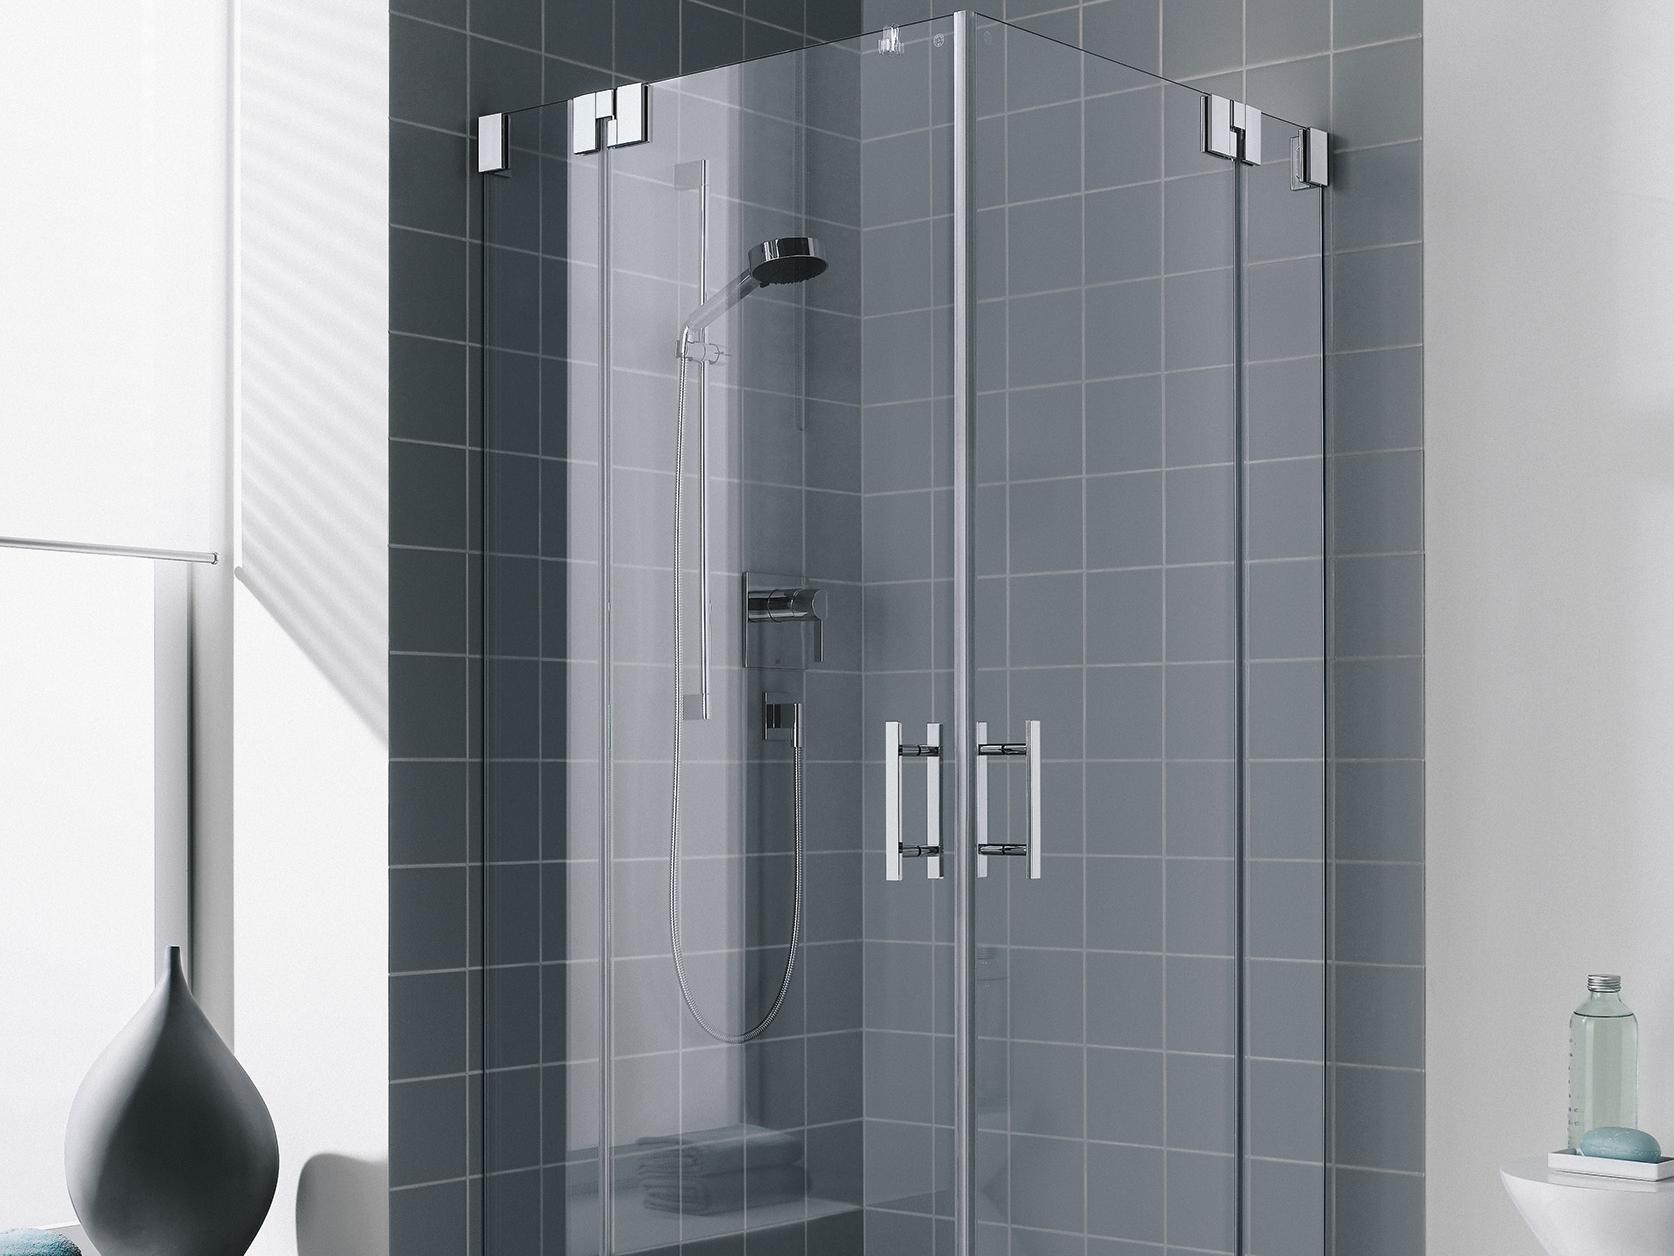 Kermi hinged shower enclosure, FILIA two-part corner entry (two-part hinged doors with fixed panels) – half part